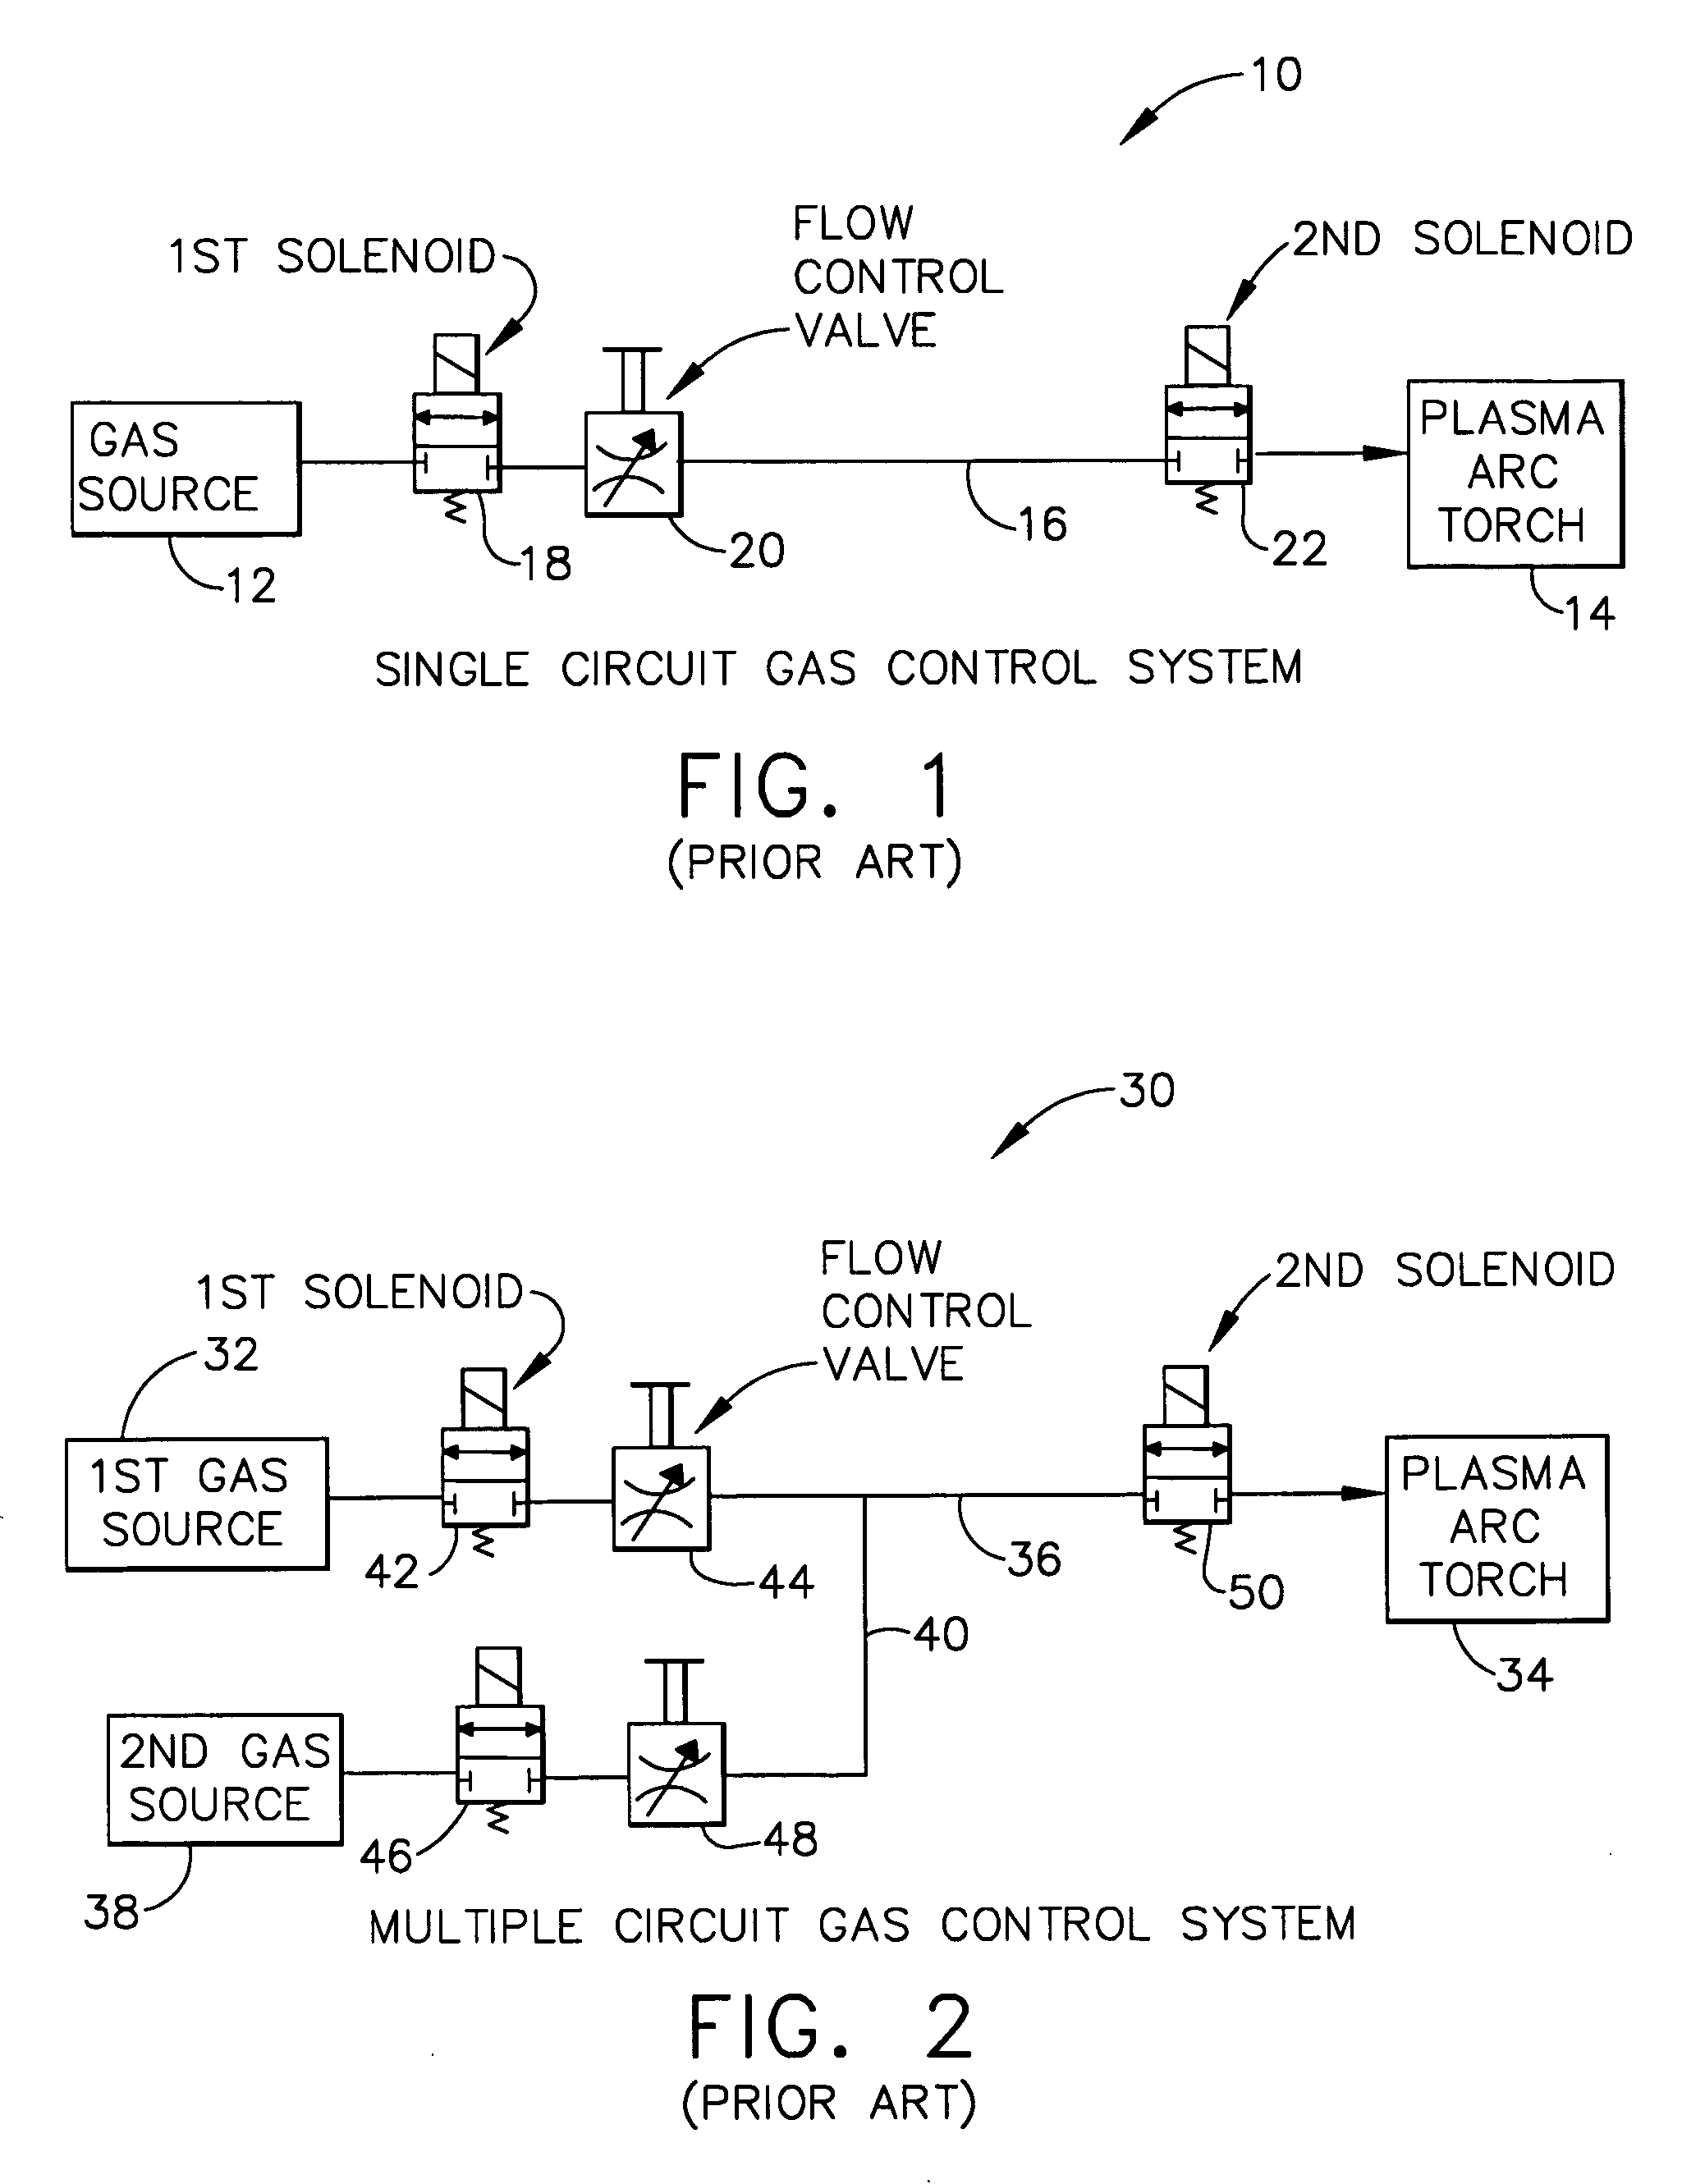 Gas flow pre-charge for a plasma arc torch